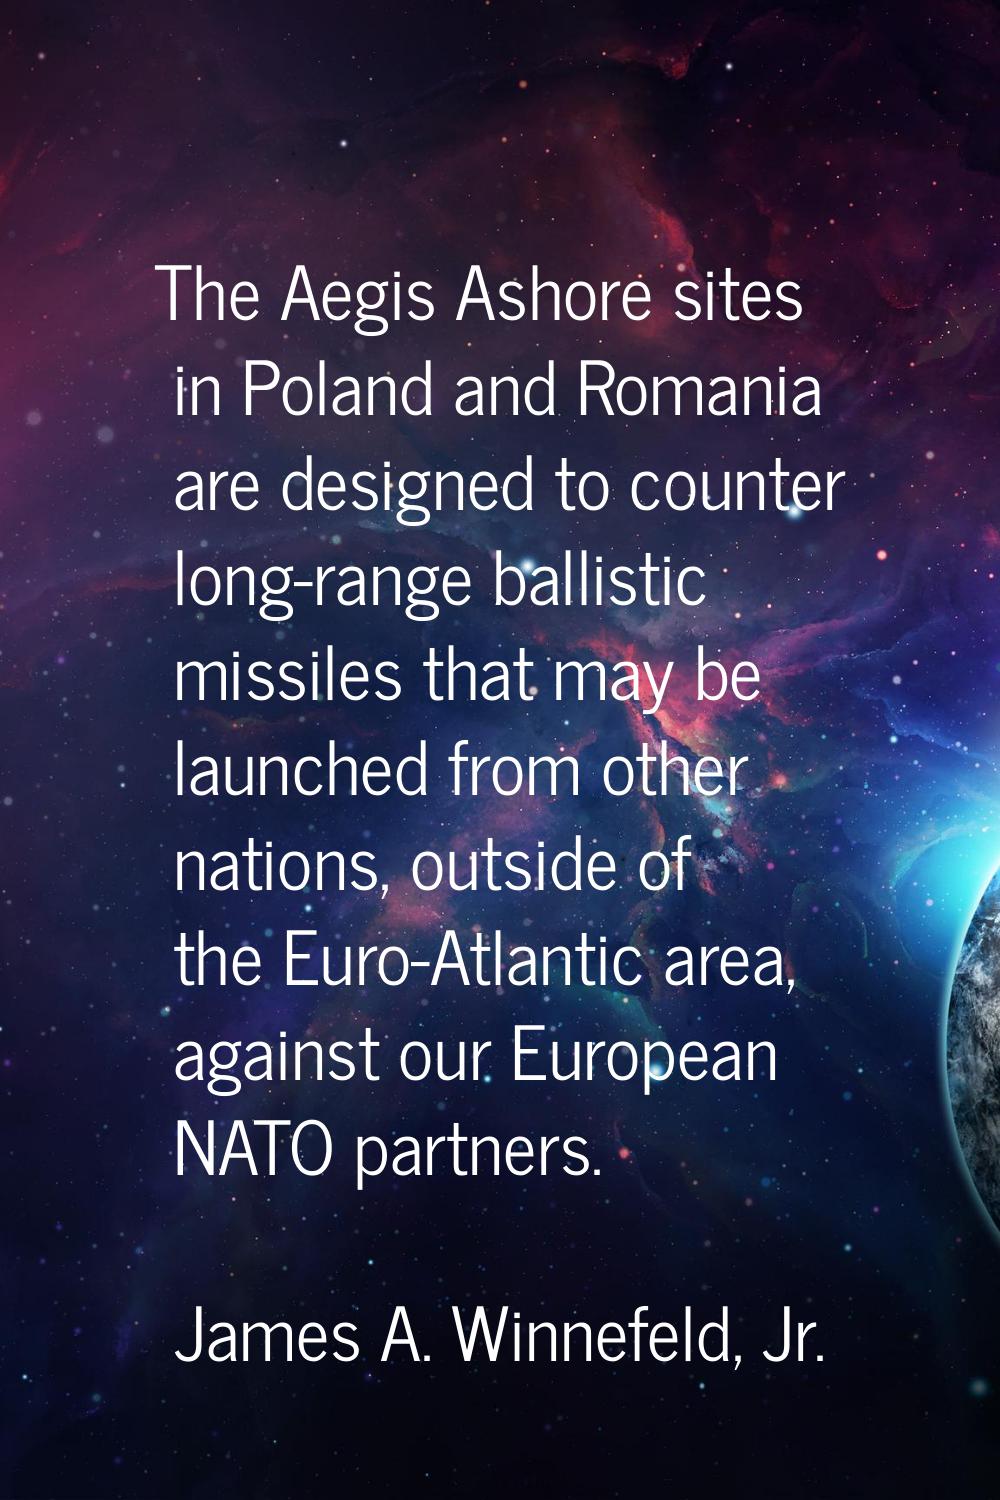 The Aegis Ashore sites in Poland and Romania are designed to counter long-range ballistic missiles 